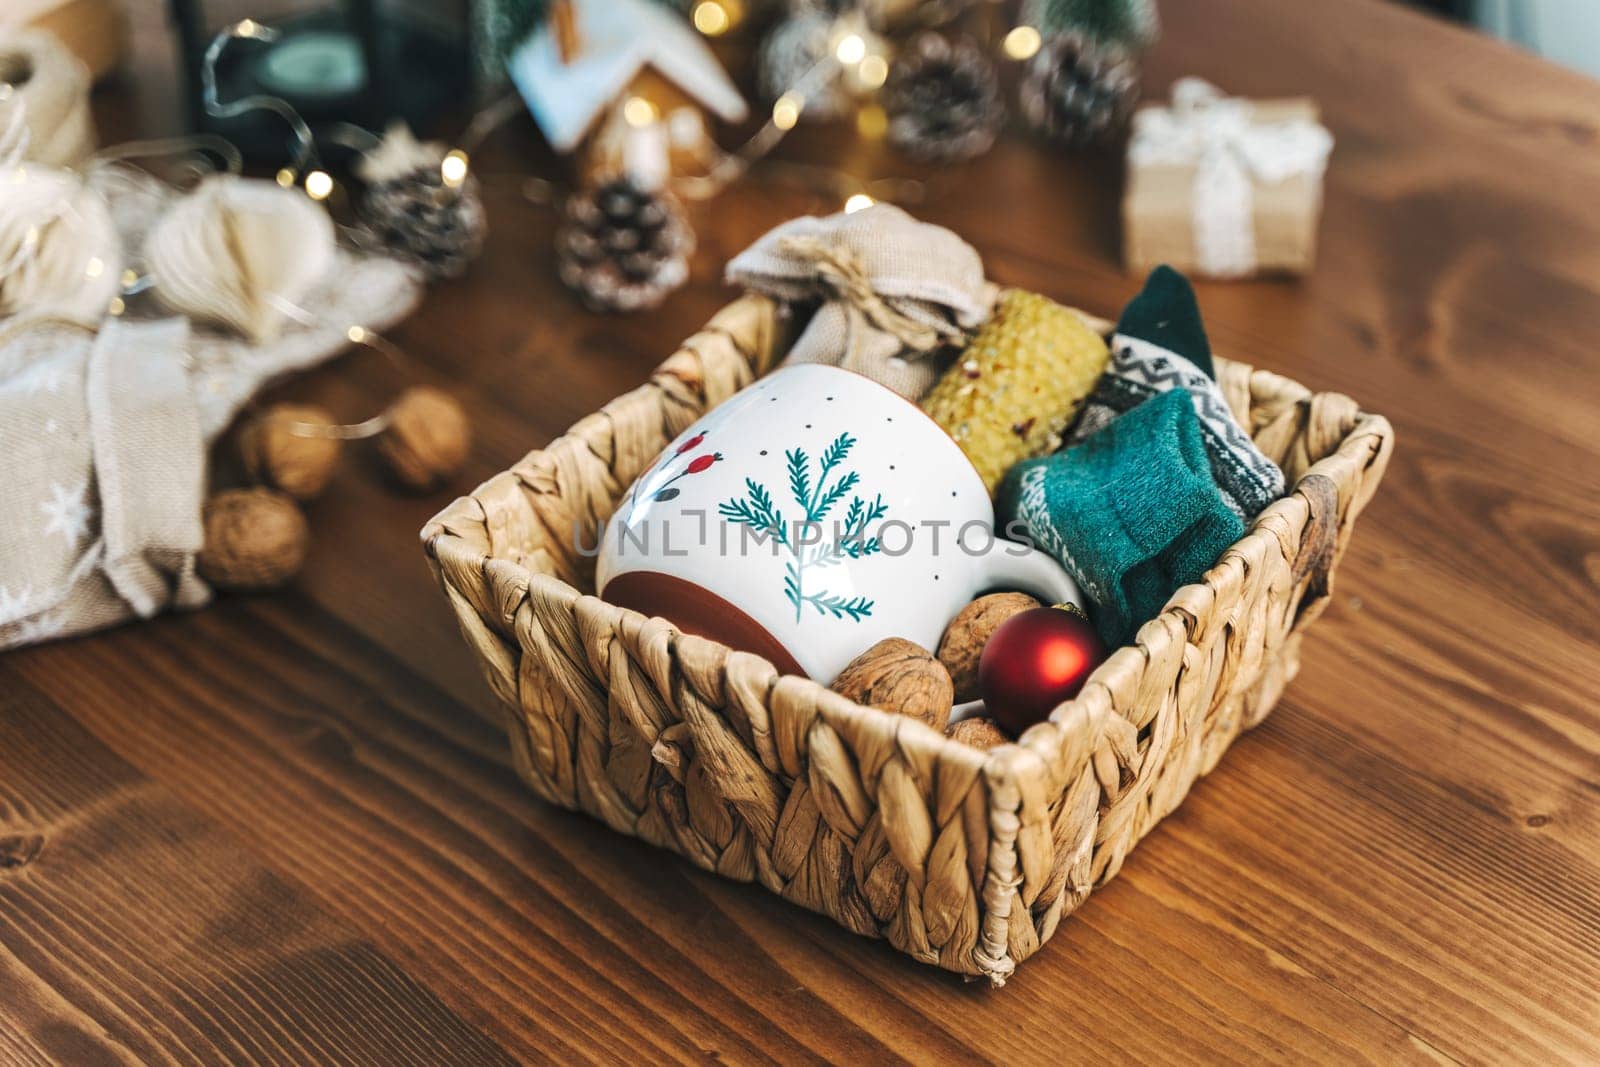 Christmas eco gift wicker basket, close up. Unprepared presents on wooden table with natural decor elements and items Christmas packing wrapping Concept.